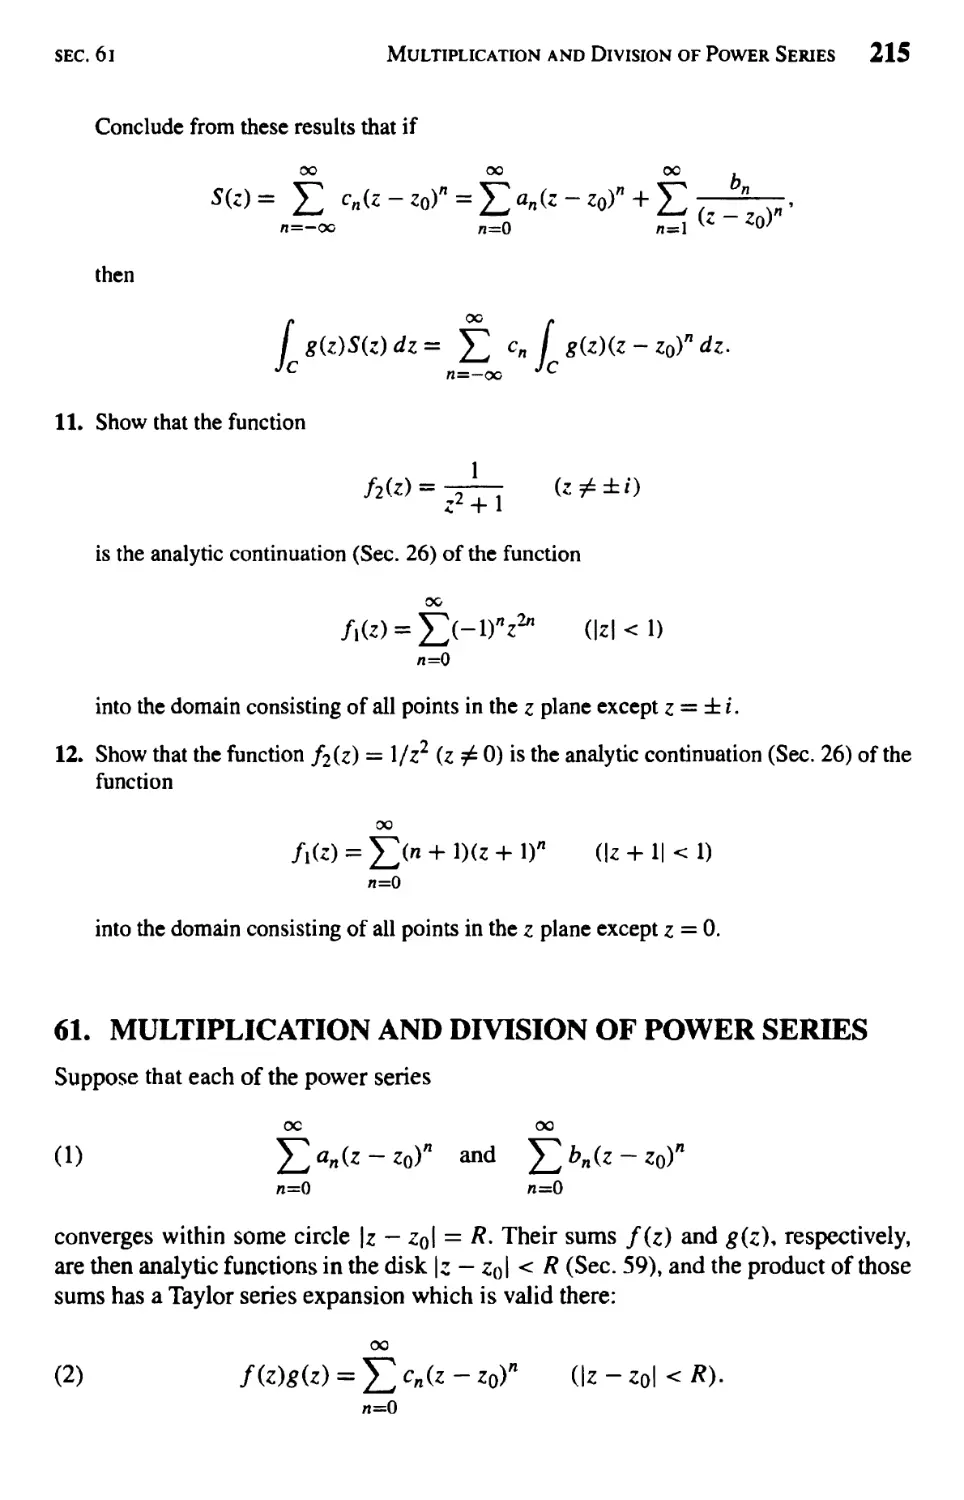 Multiplication and Division of Power Series